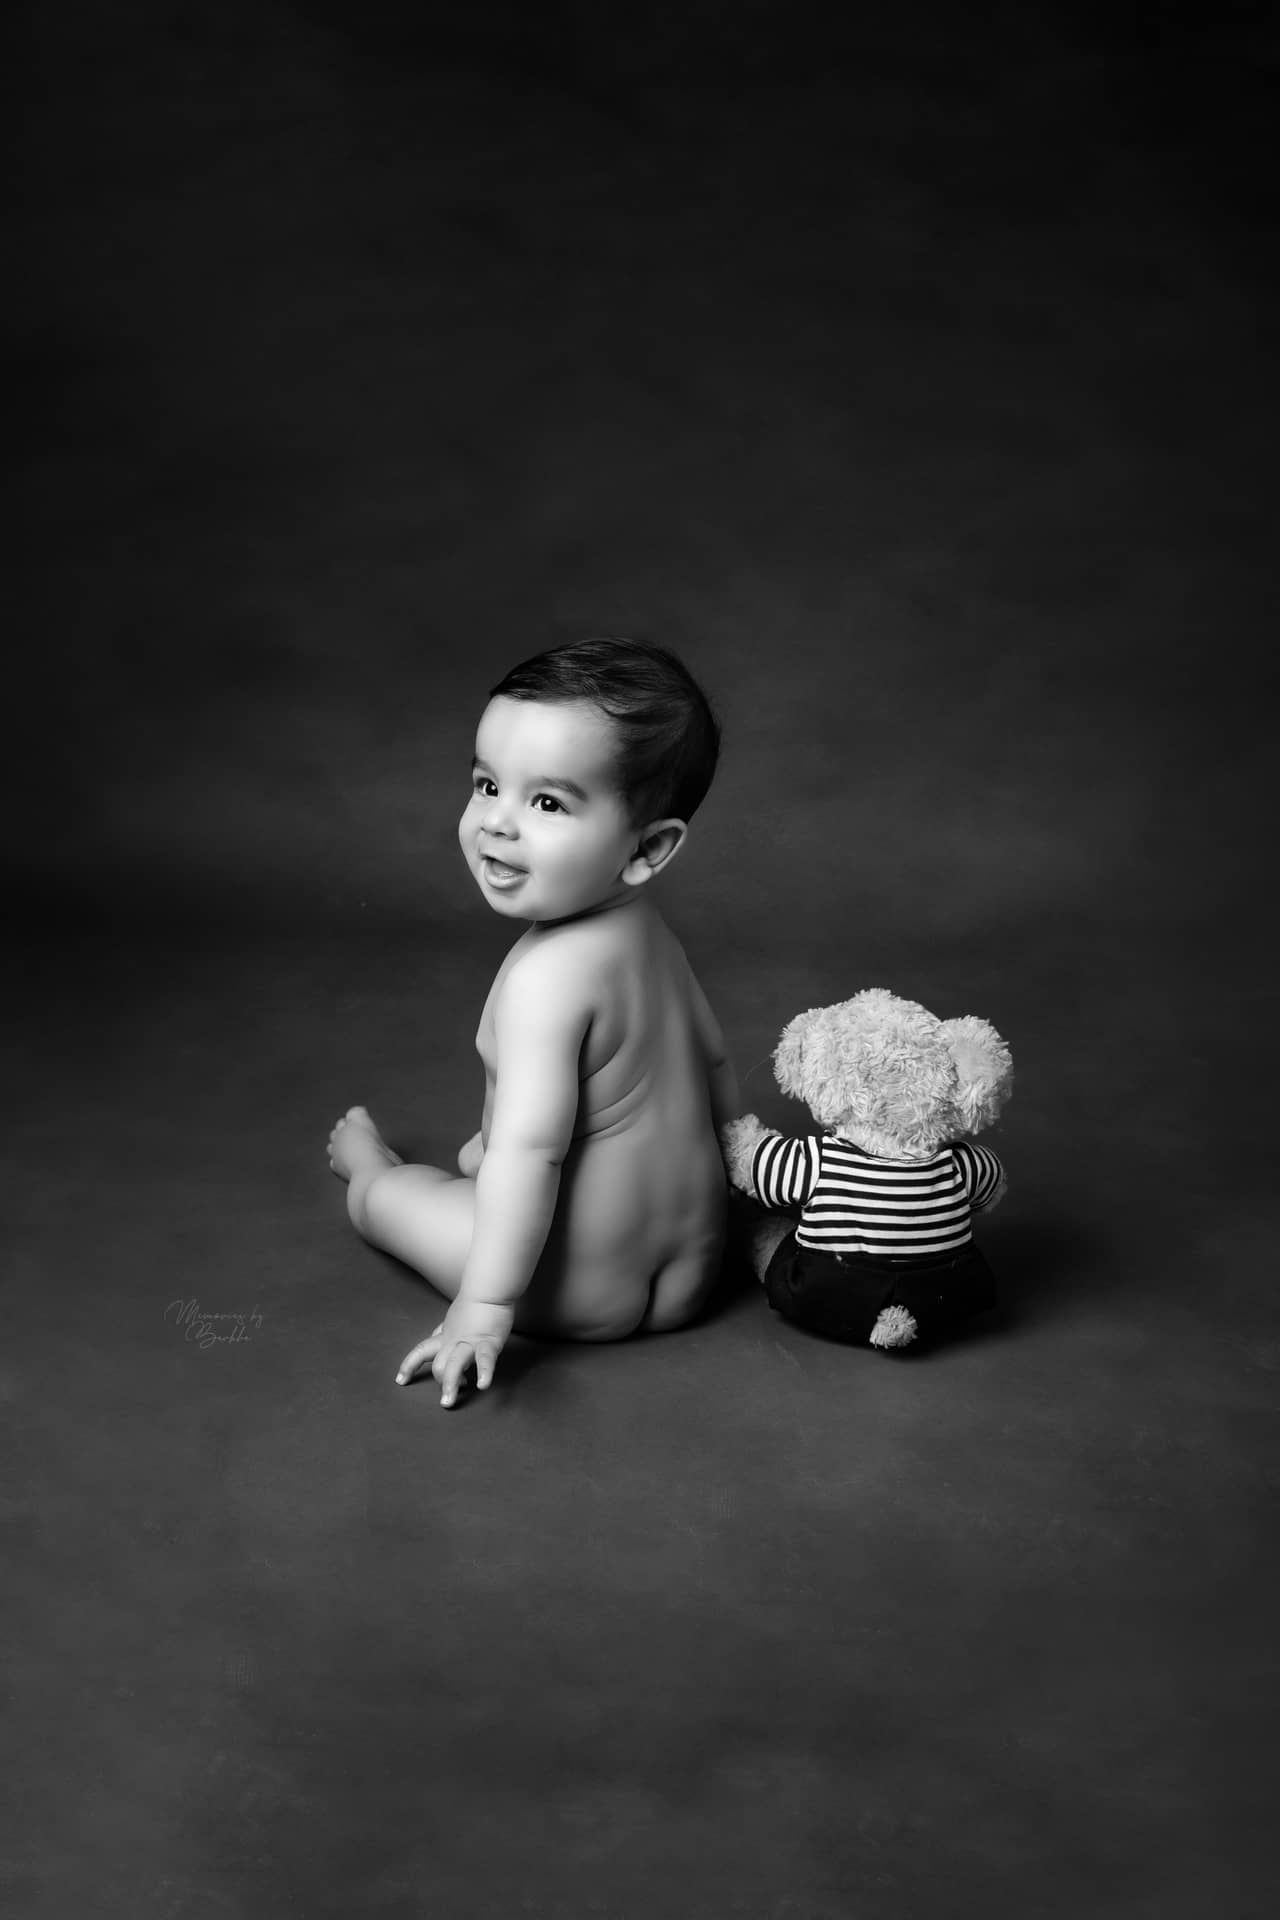 Baby Photography Archives - Page 2 of 3 - Smitten & Swoon